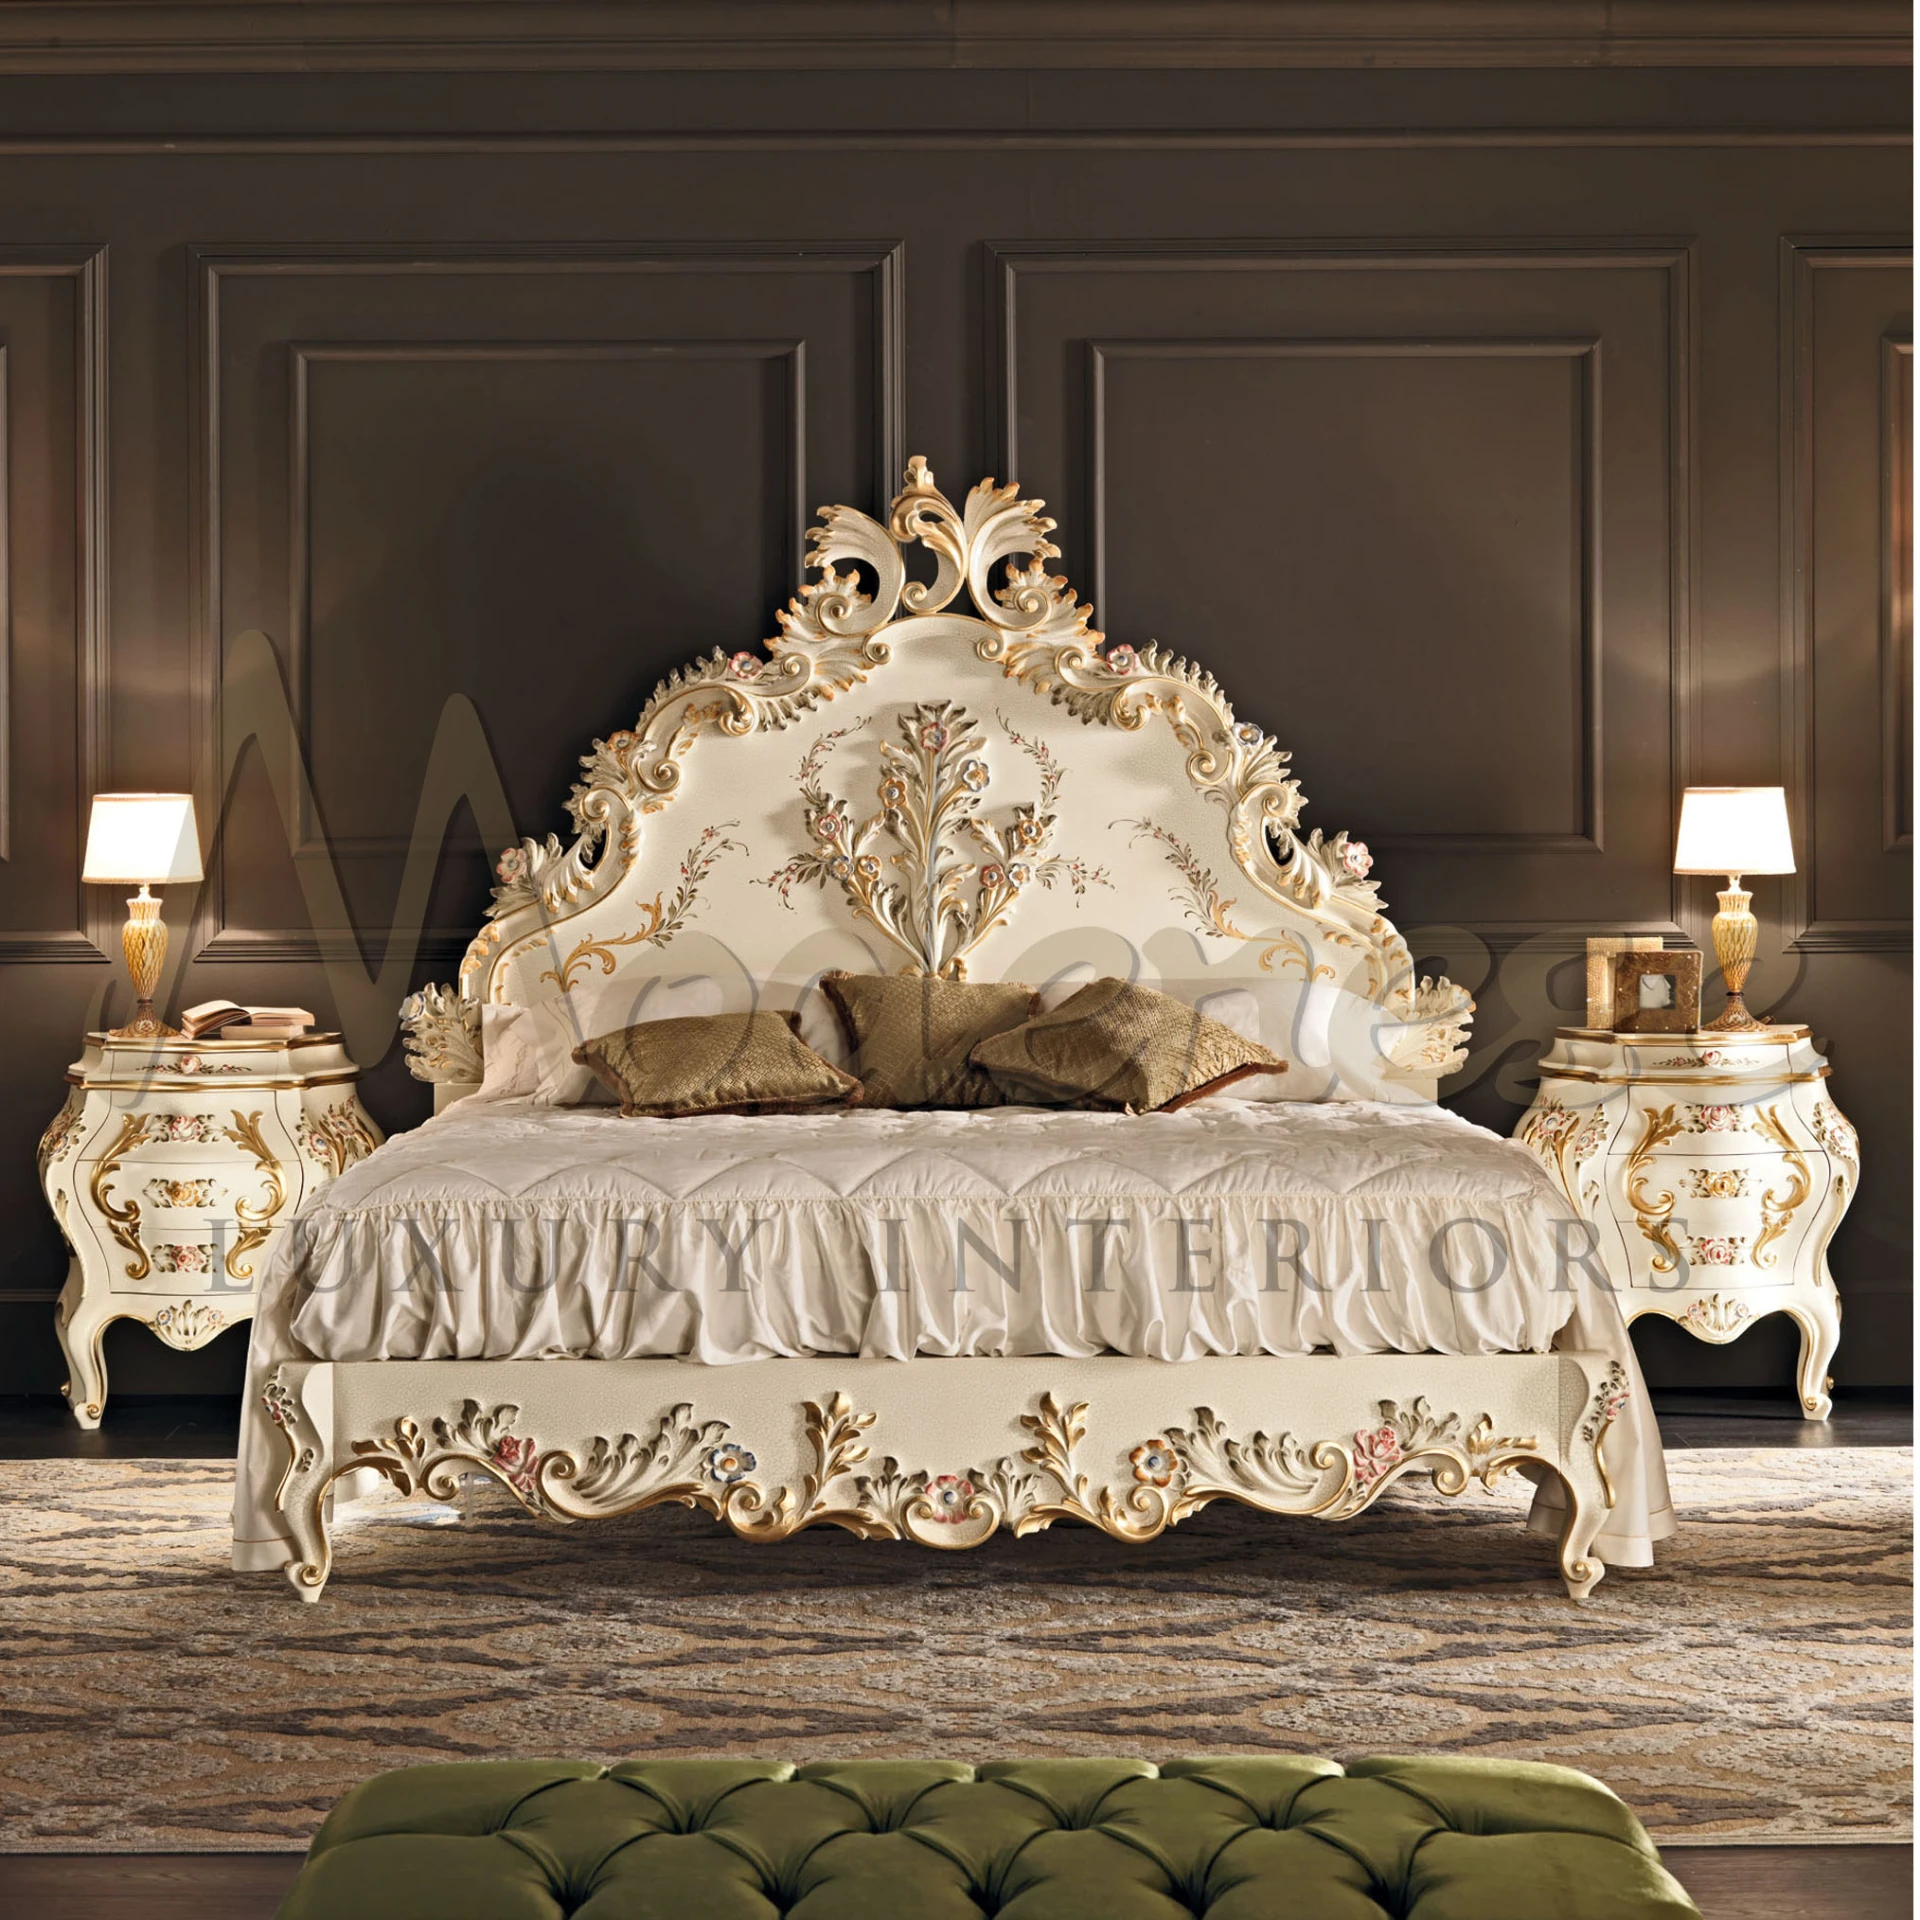 A baroque bed from Modenese Furniture Manufacturer with elaborate carvings and gold accents, complemented by matching nightstands and a lamp, against a dark wall.